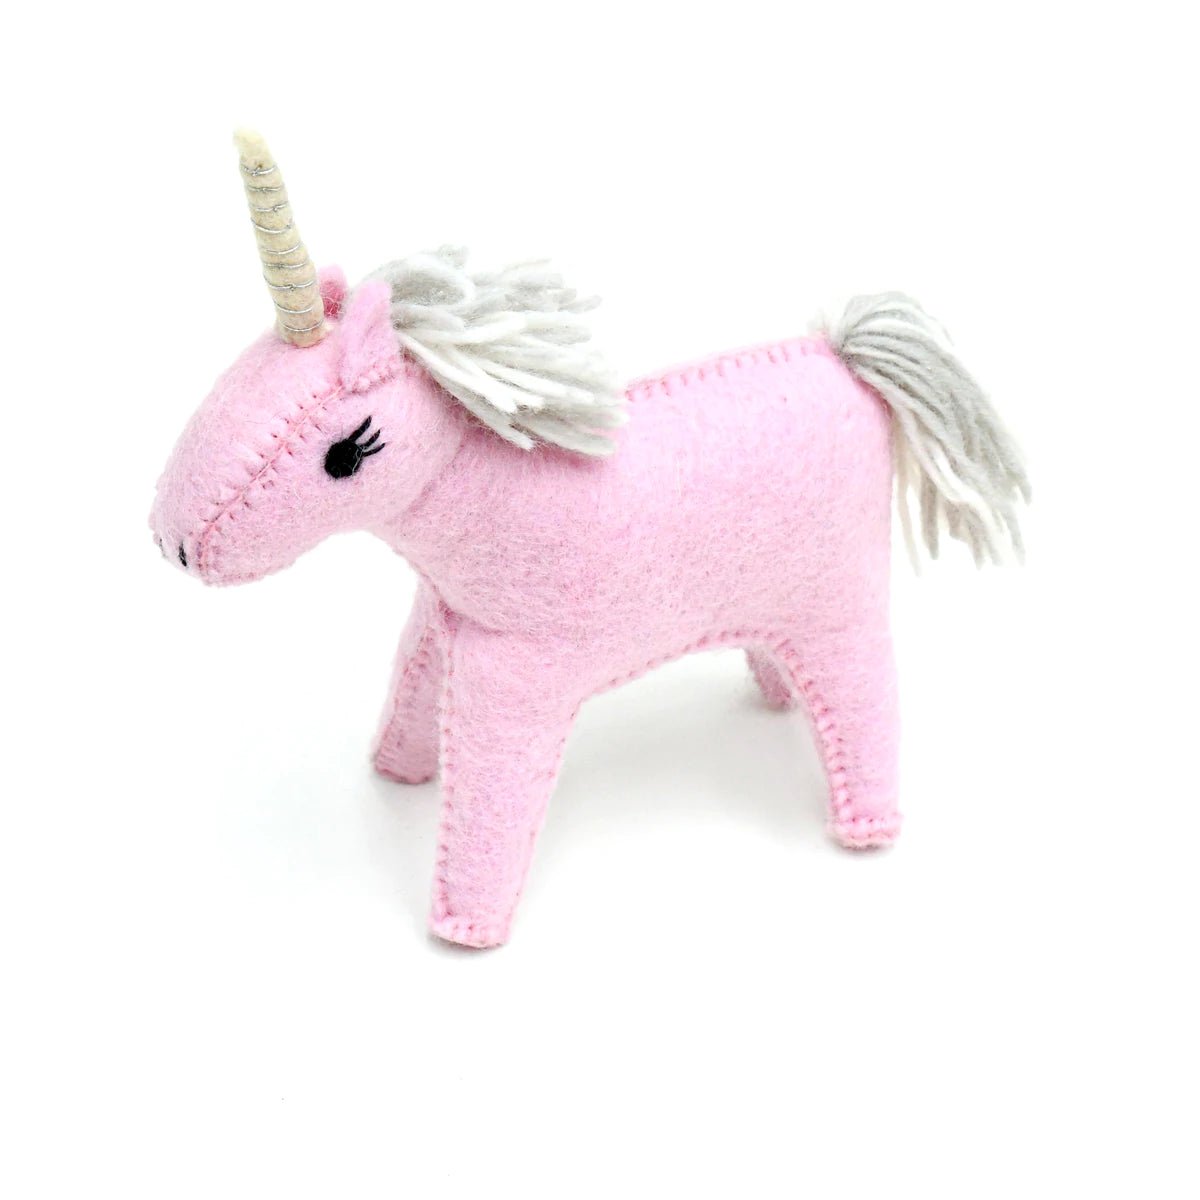 FELT PINK UNICORN TOY by TARA TREASURES - The Playful Collective